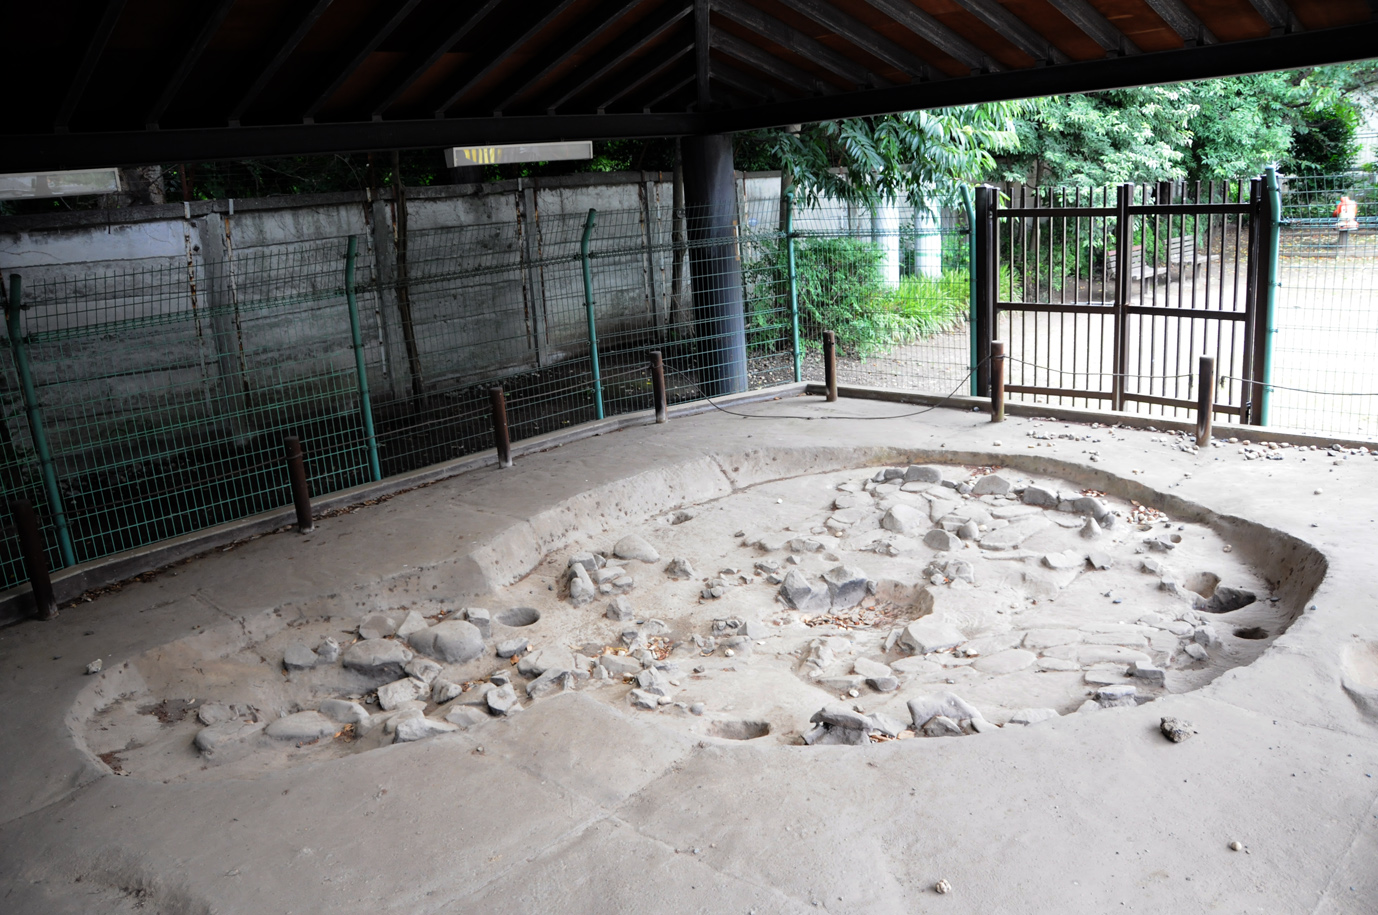 Remains of House with Hand Mirror-Shaped Stone-Paved Floor